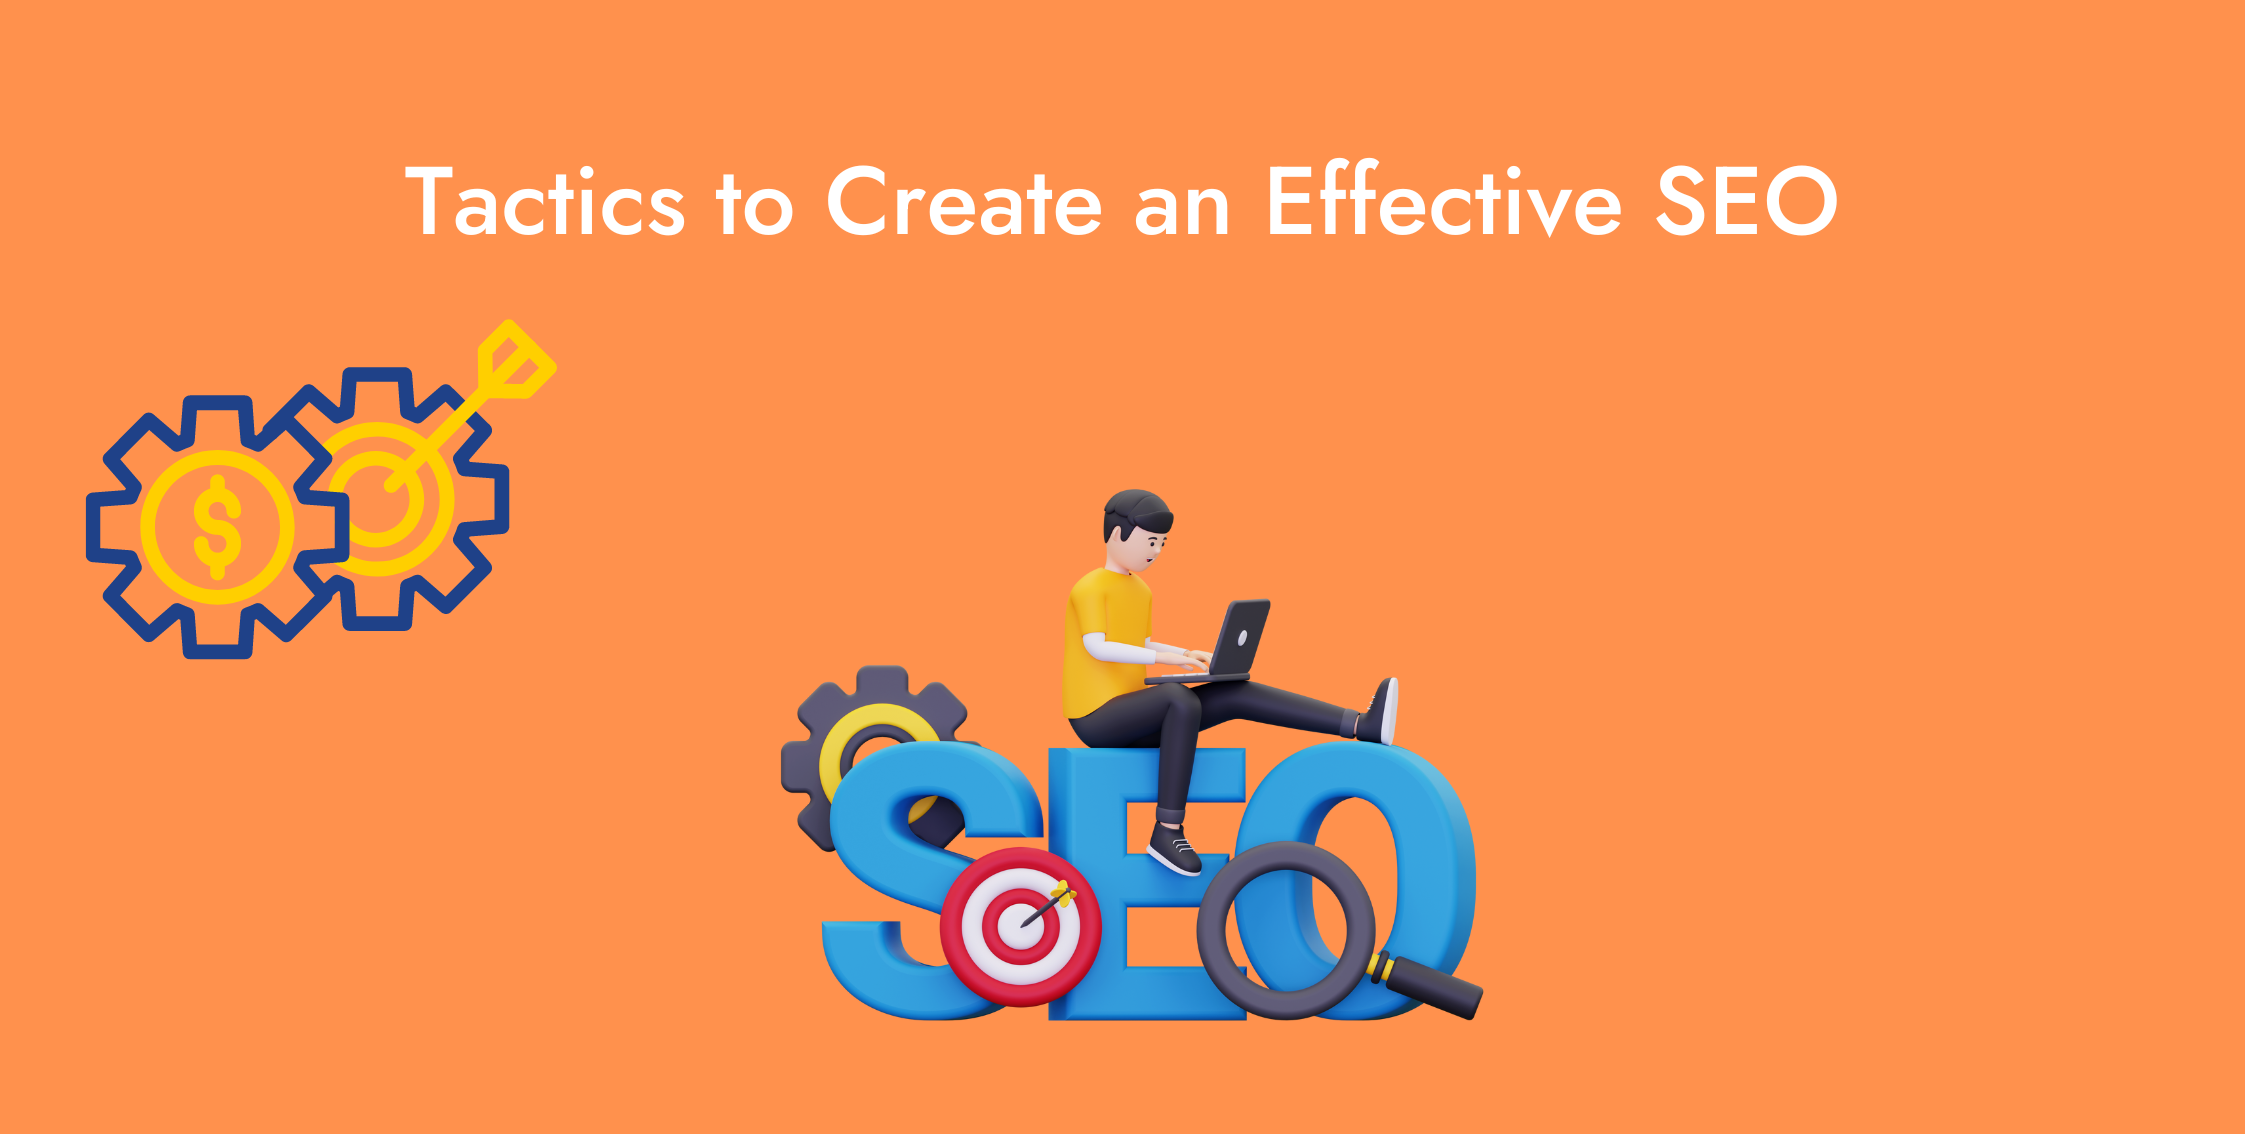 6 Tactics to Create an Effective SEO Strategy